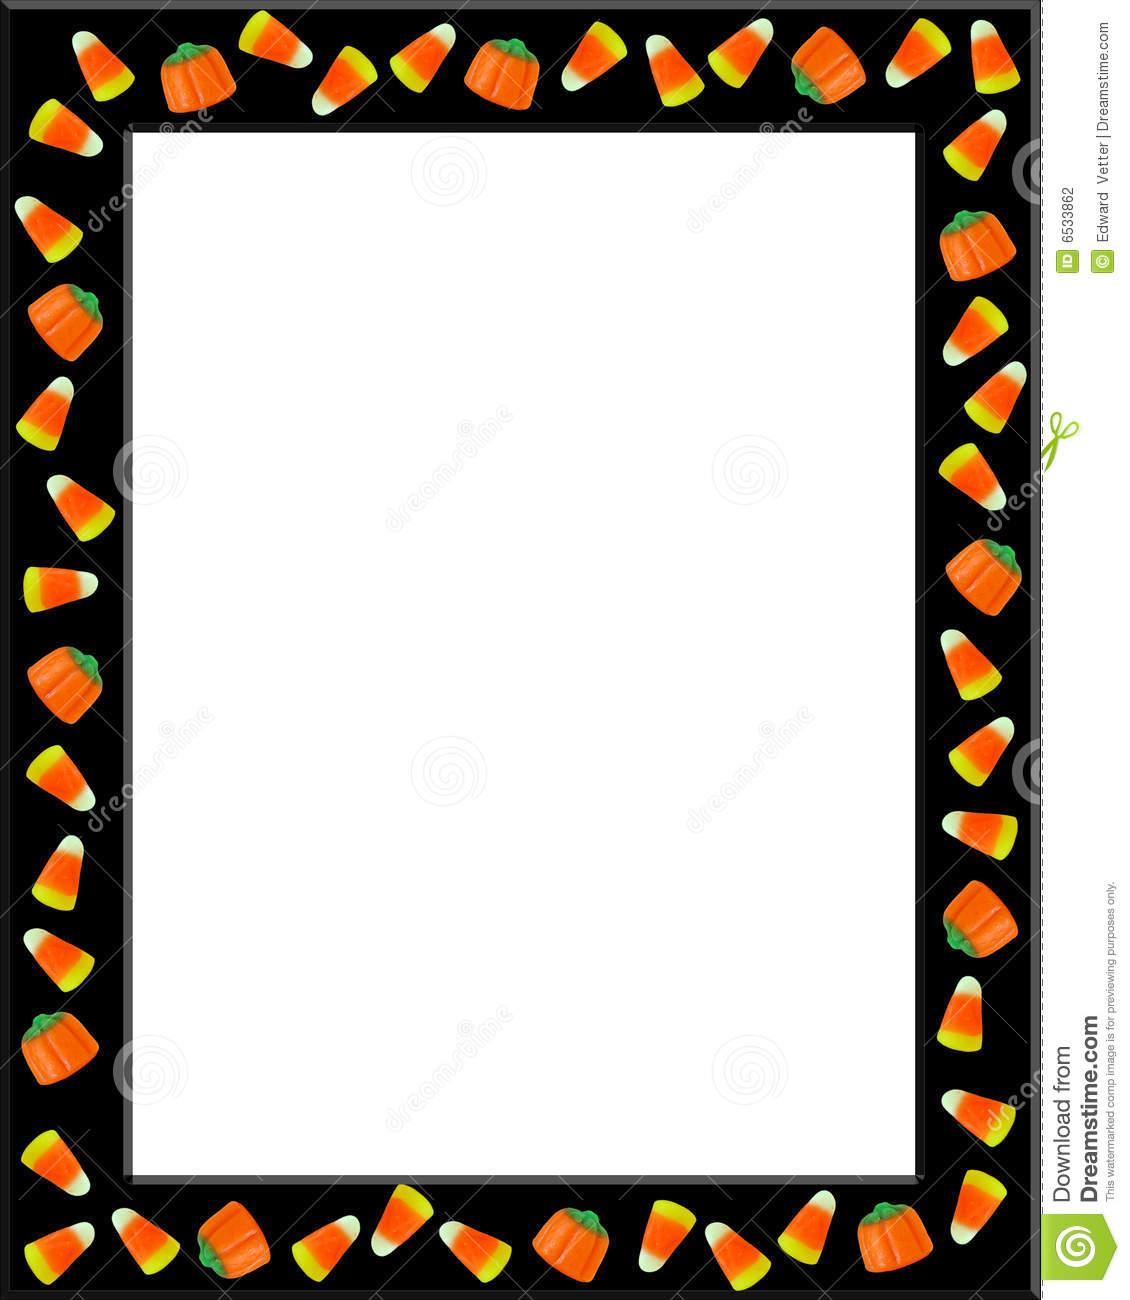 Illustration Composition Of Candy Corn For Halloween Card Invitation